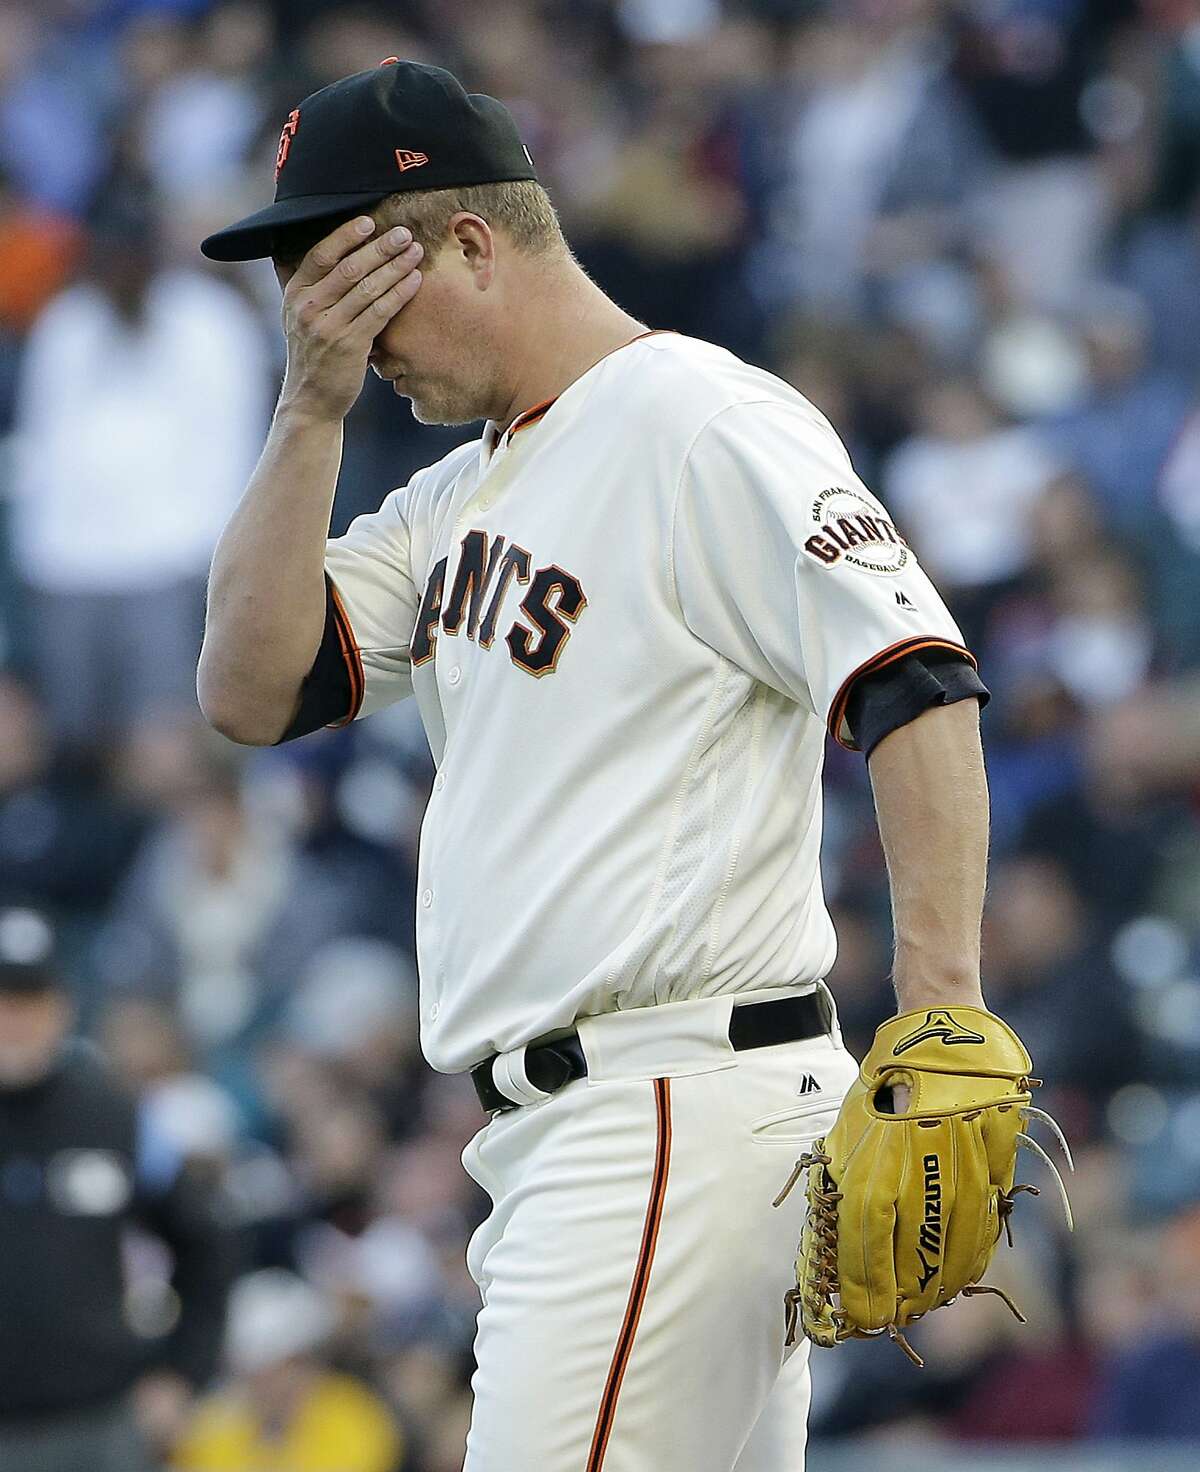 San Francisco Giants pitcher Matt Cain reacts after allowing an RBI-double to Pittsburgh Pirates' Josh Bell during the first inning of a baseball game in San Francisco, Monday, July 24, 2017. (AP Photo/Jeff Chiu)